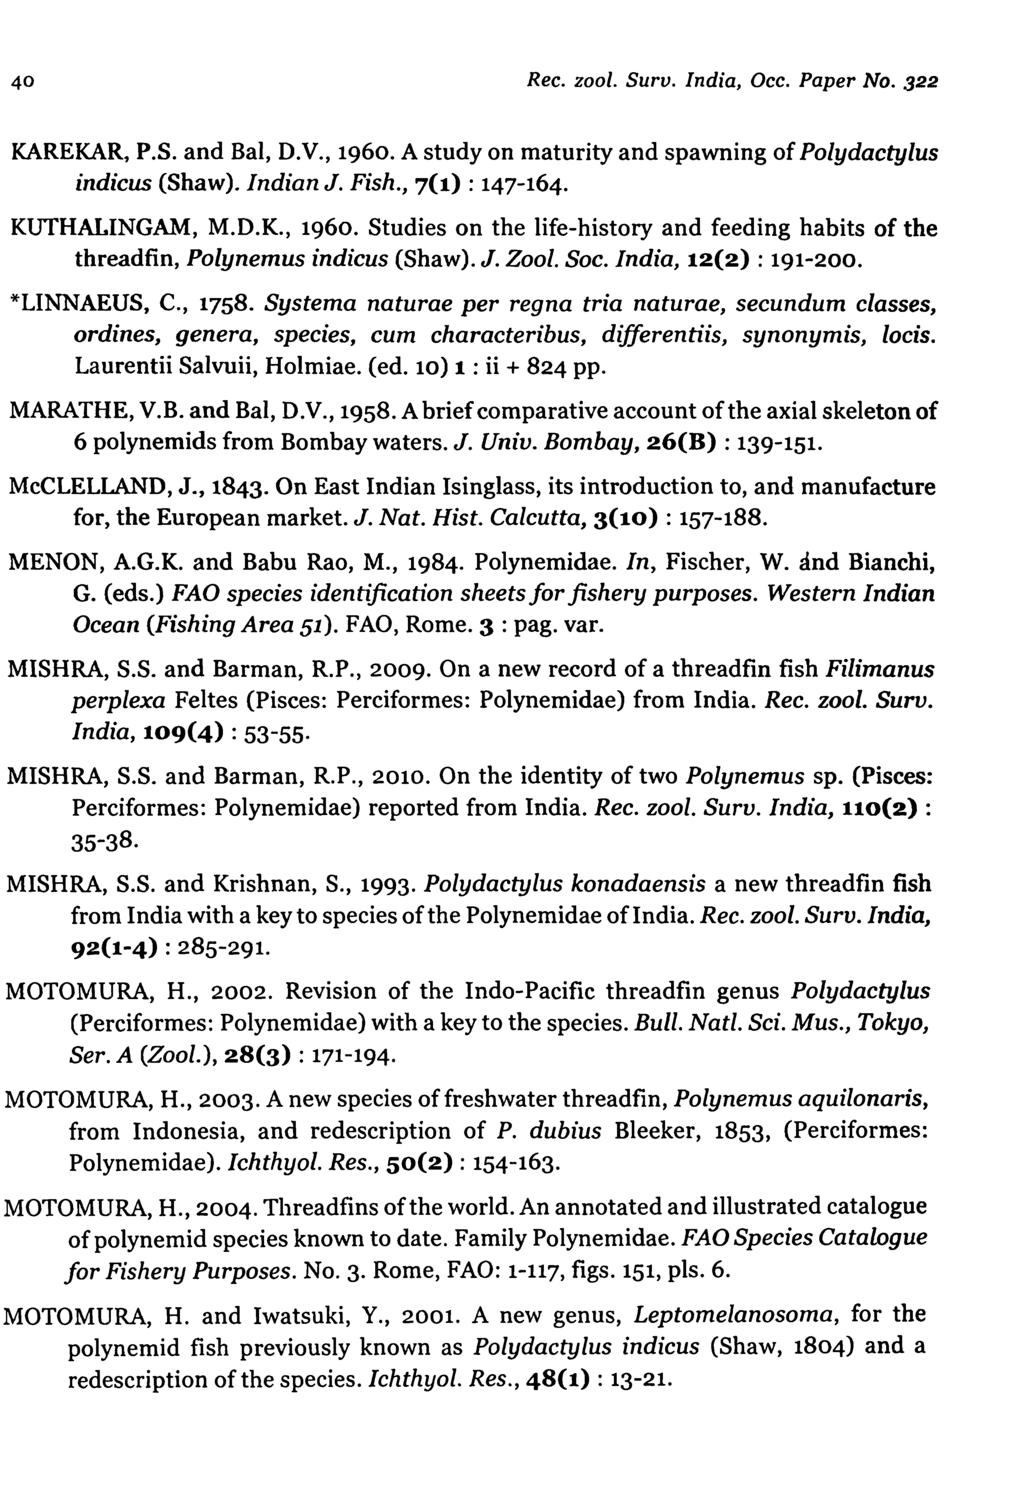 40 Ree. zool. Suru. India, Dee. Paper No. 322 KAREKAR, P.S. and Bal, D.V., 1960. A study on maturity and spawning of Polydactylus indicus (Shaw). Indian J. Fish., 7(1) : 147-164. KUTHALINGAM, M.D.K., 1960. Studies on the life-history and feeding habits of the threadfin, Polynemus indicus (Shaw).